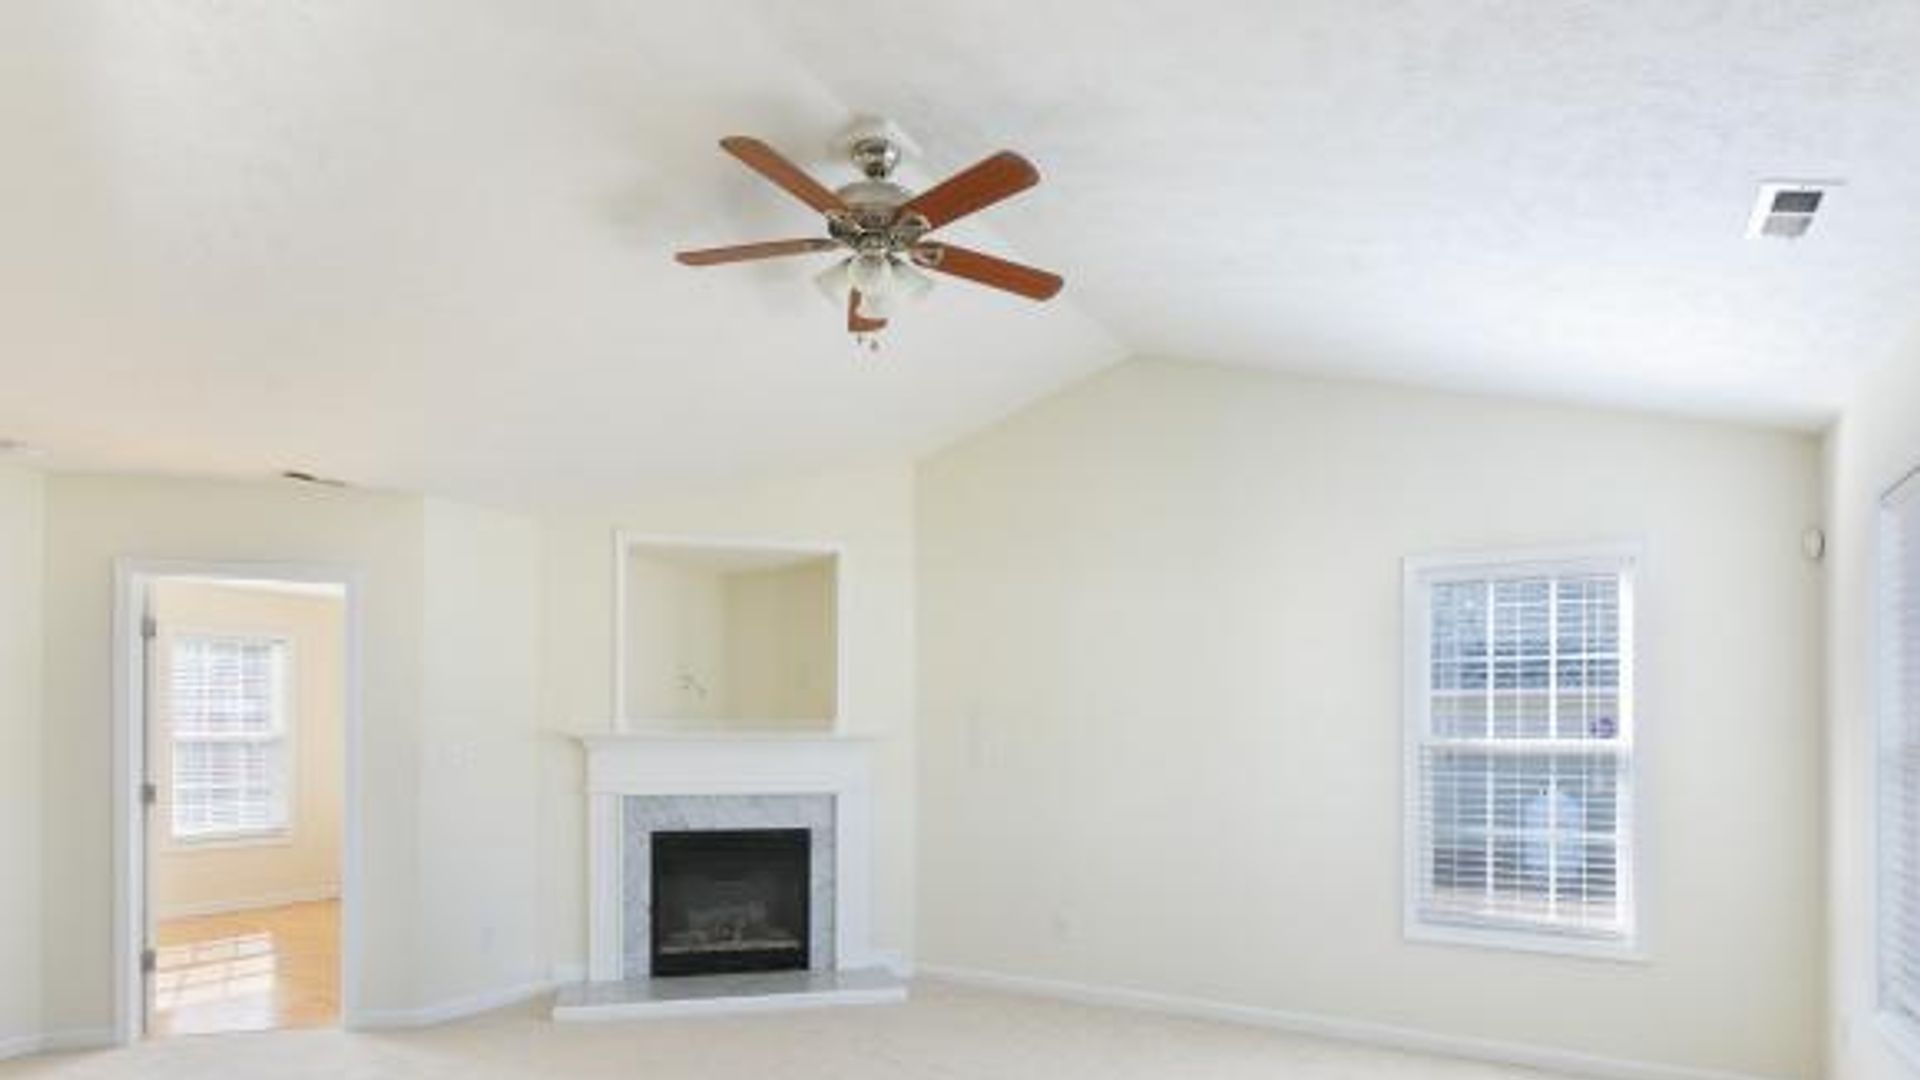 3 bedroom house at Boone Trl, Fayetteville, NC, USA